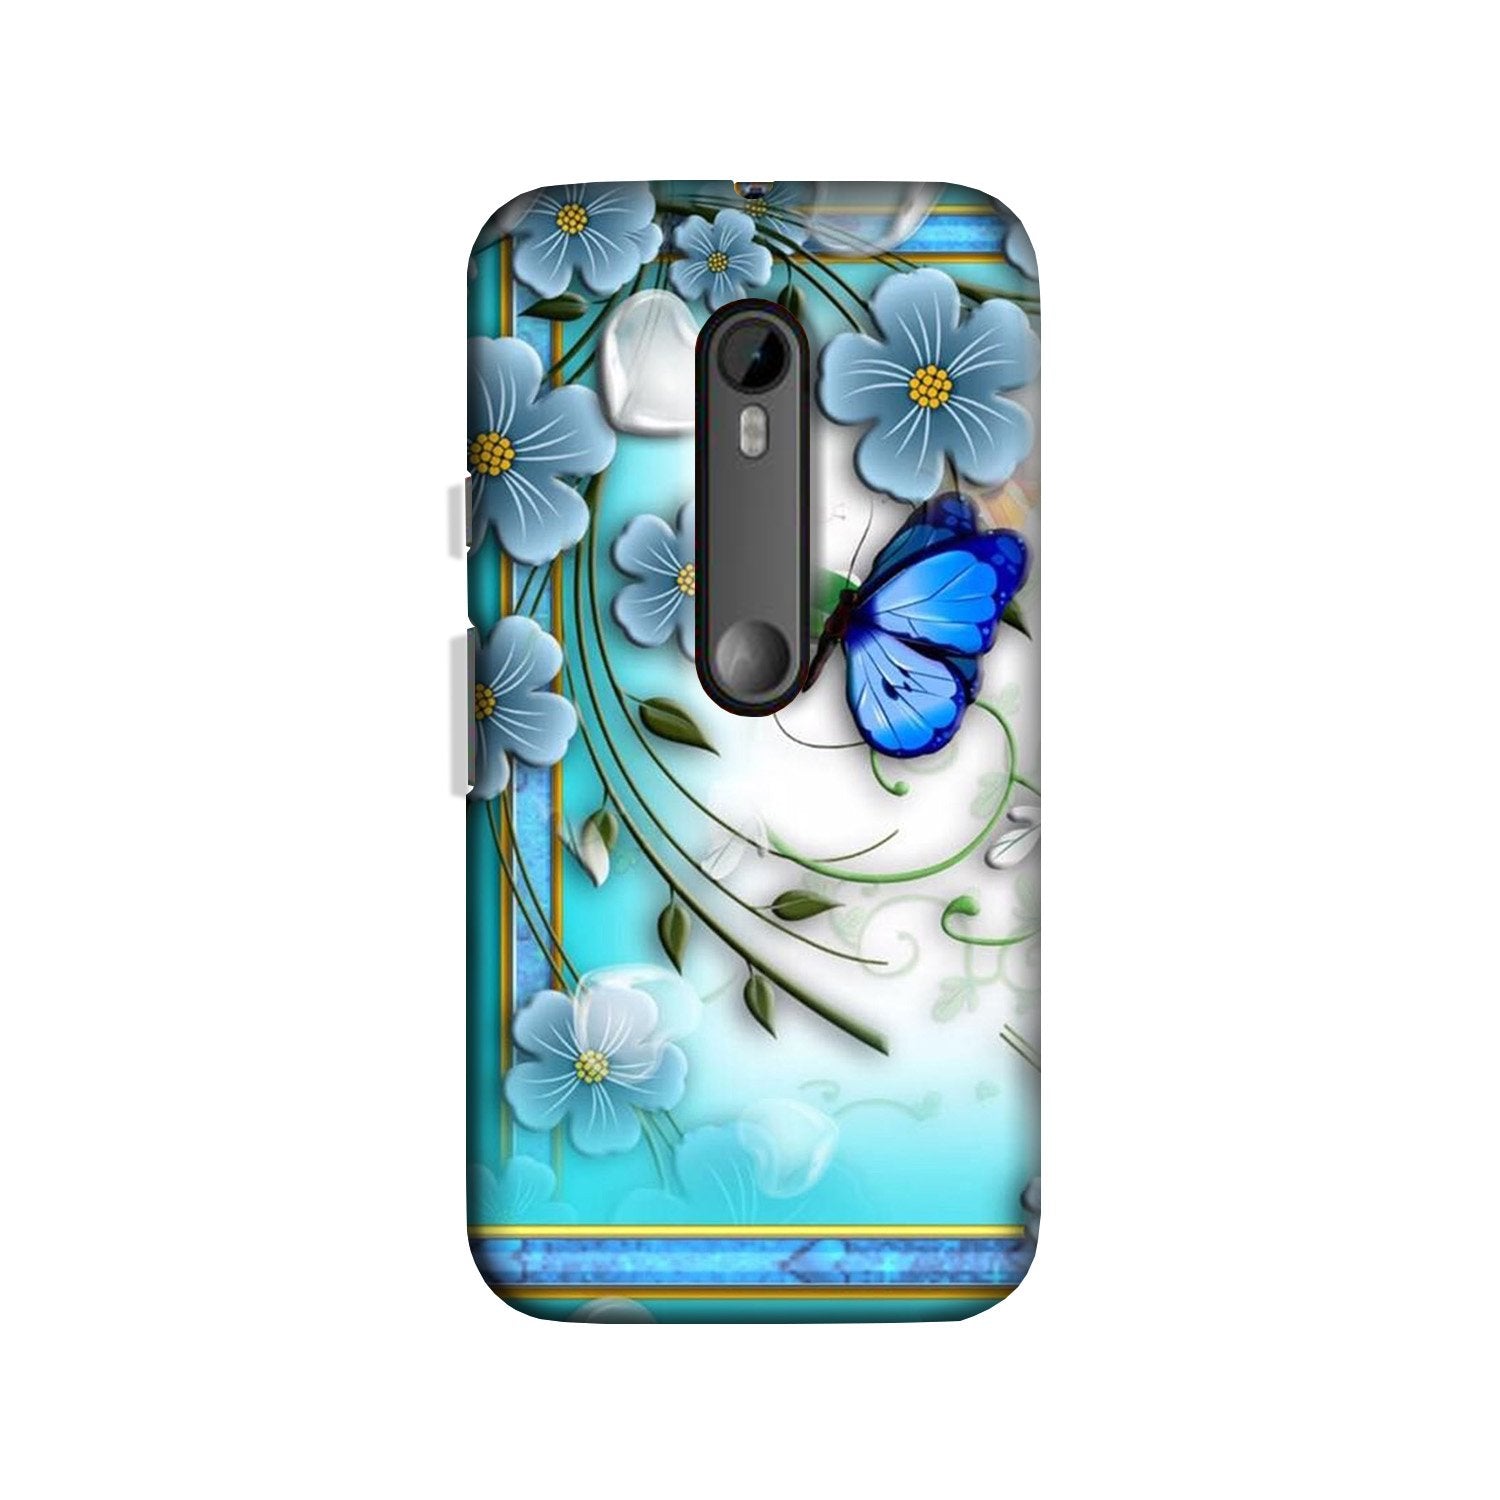 Blue Butterfly Case for Moto X Style